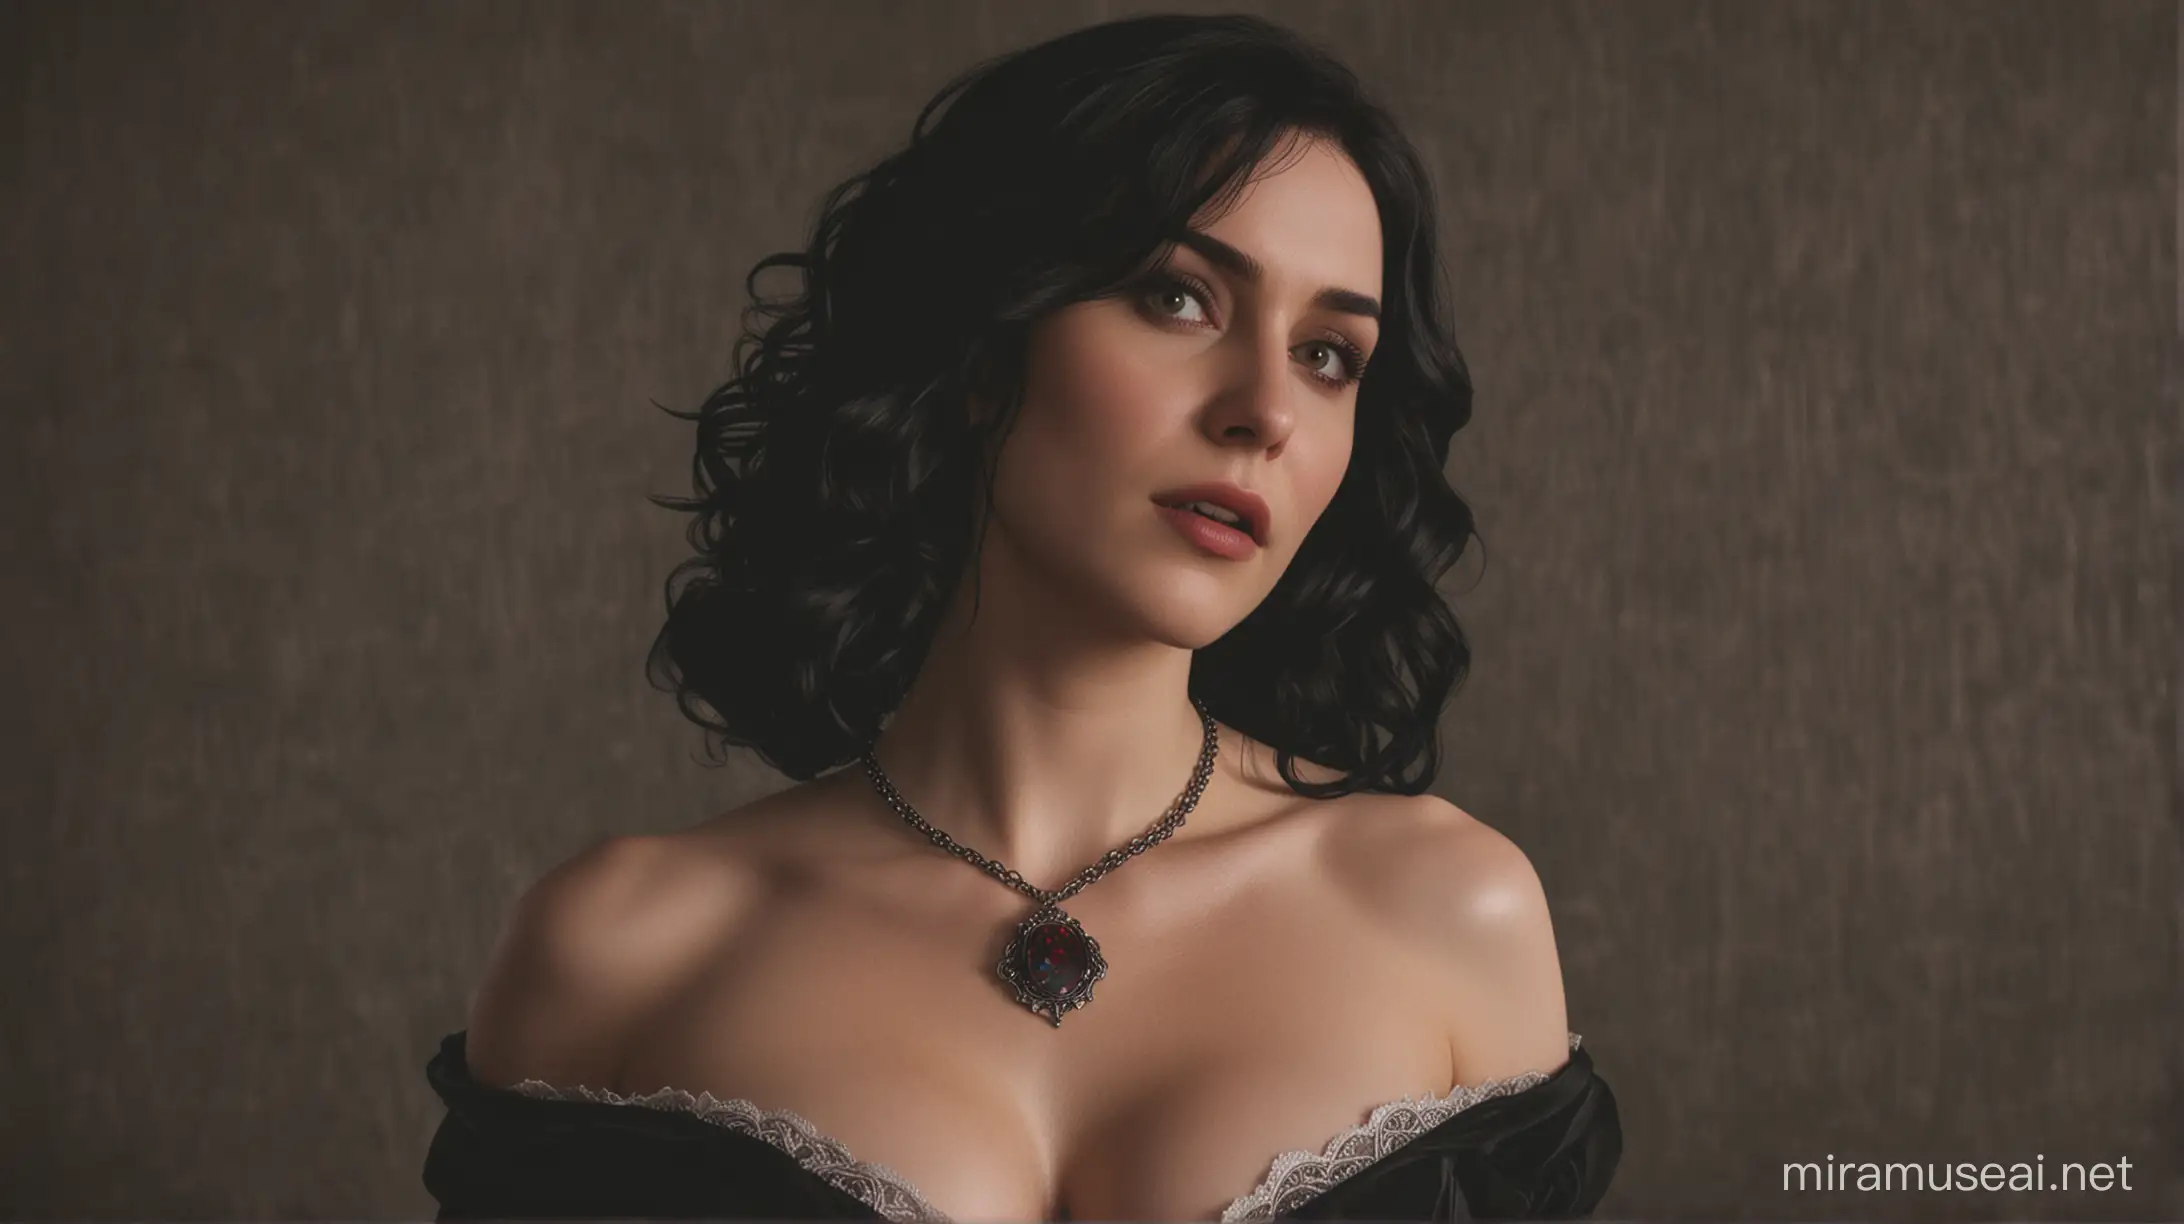 Seductive Yennefer and Triss Merigold in the Chamber of the King